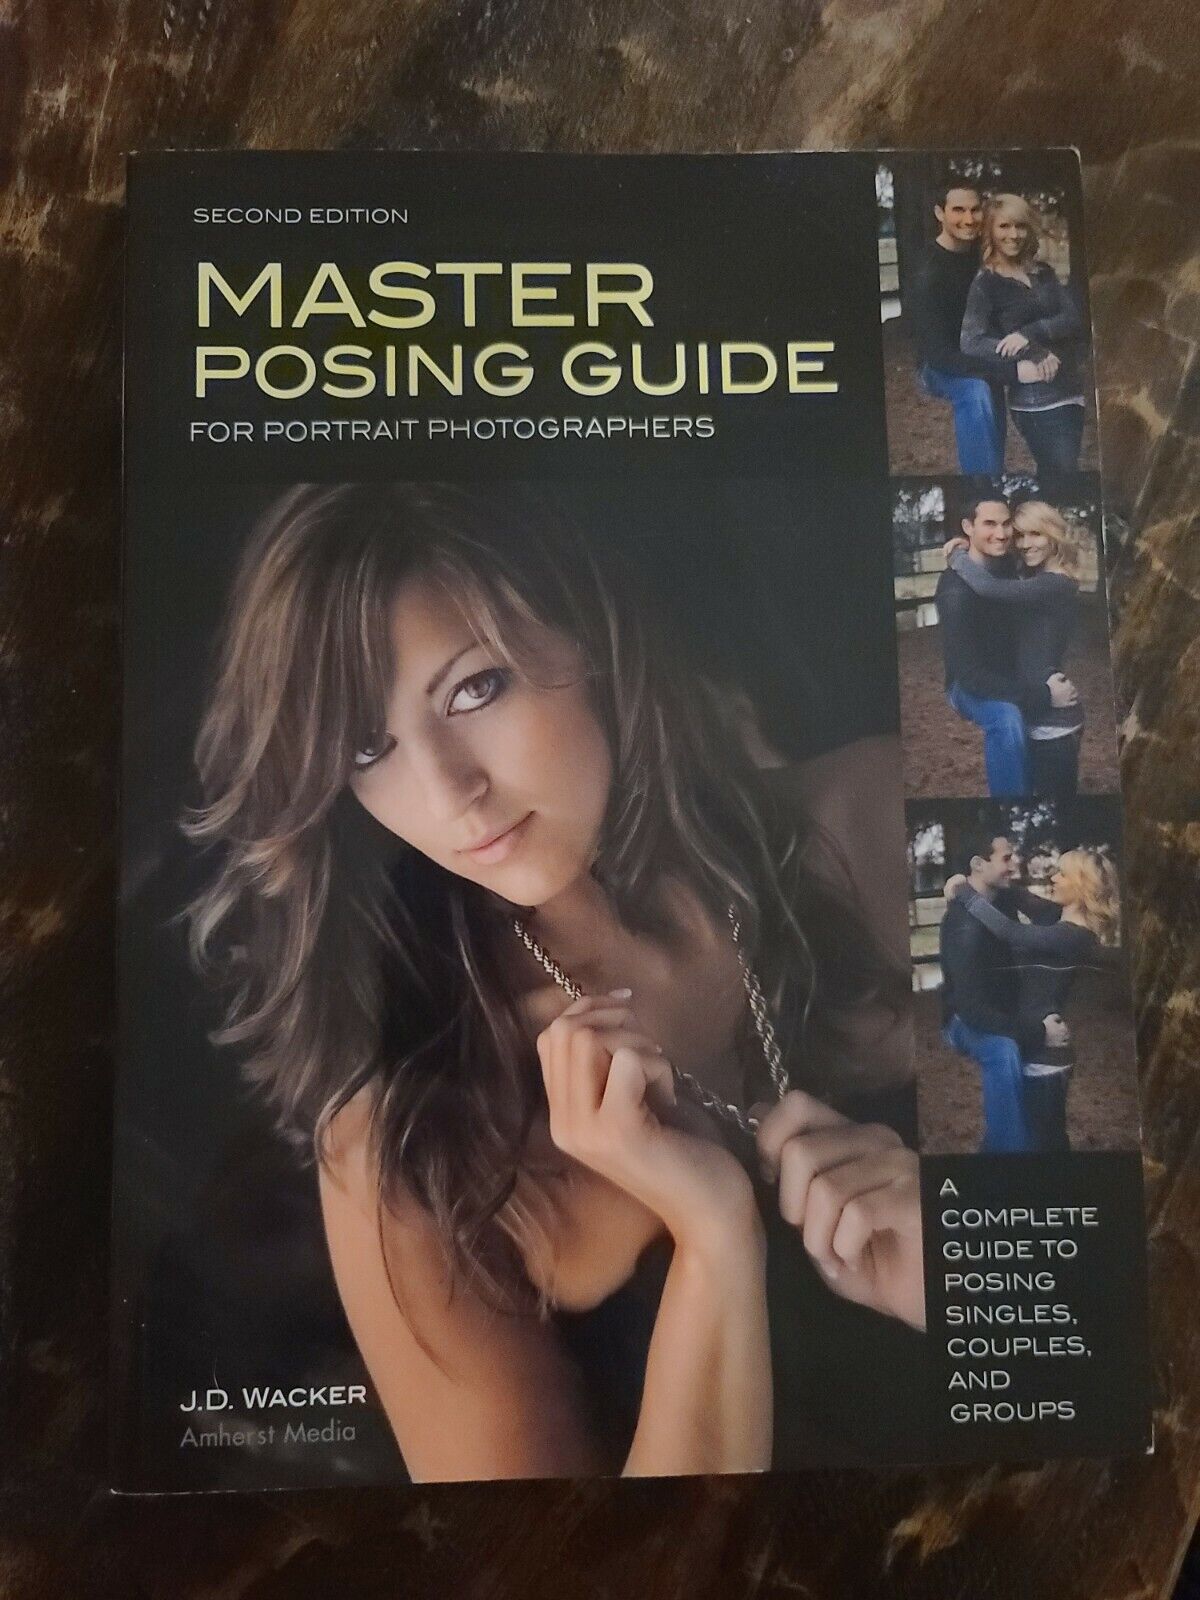 Master Posing Guide For Portrait Photographers 2nd Edition By J.D. Wacker 2013